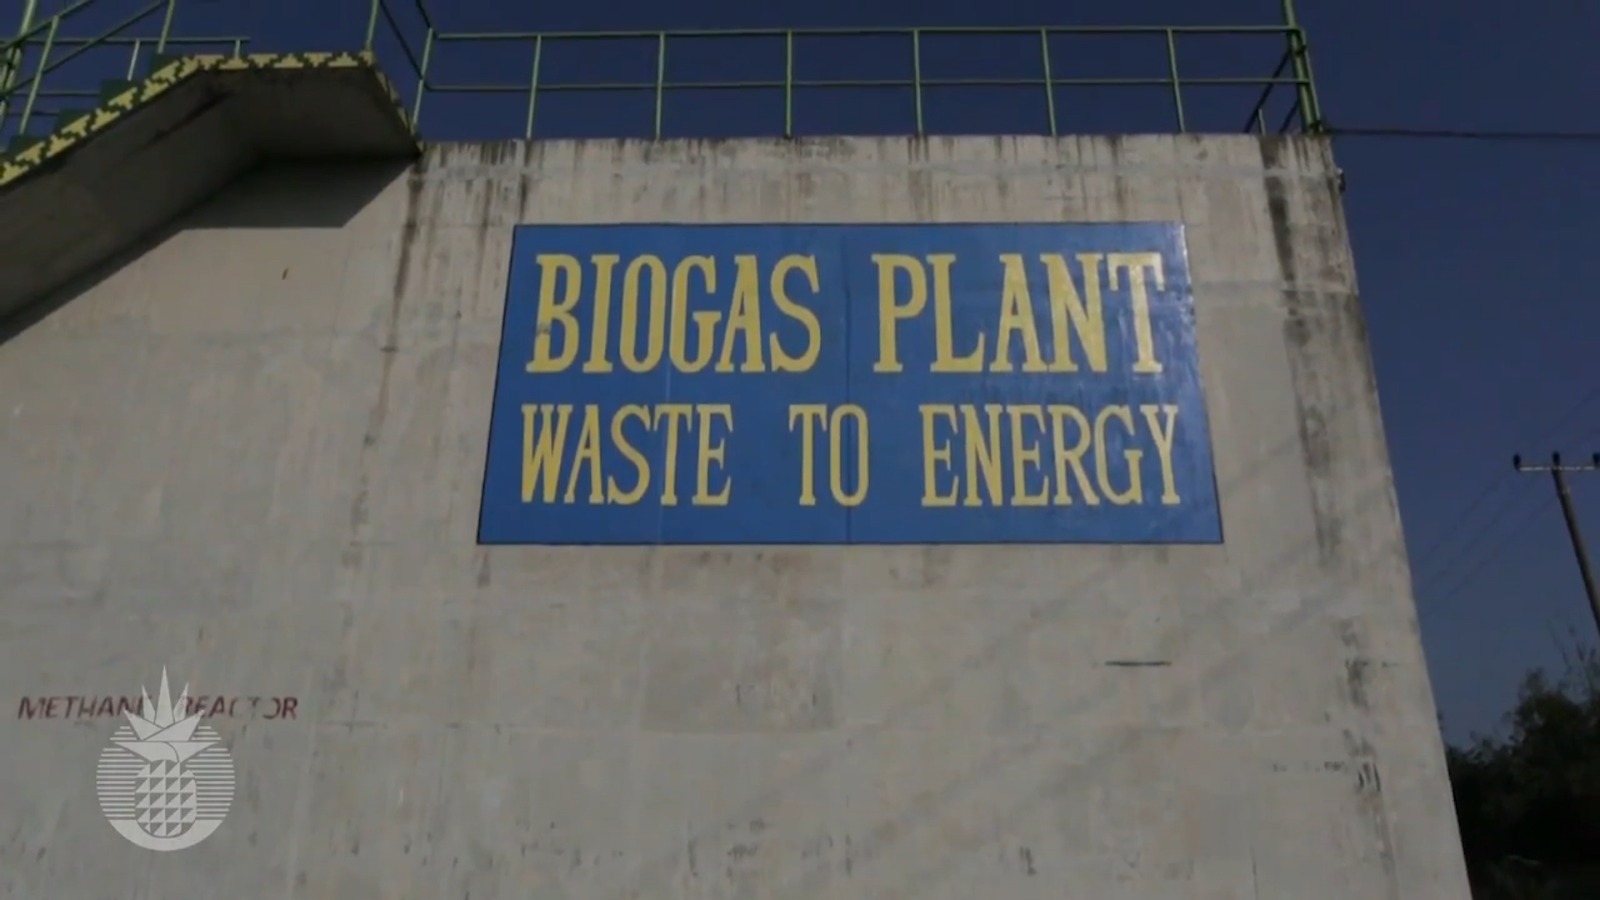 Potential of GGF Biogas Plant in Reducing Greenhouse Gas Emissions